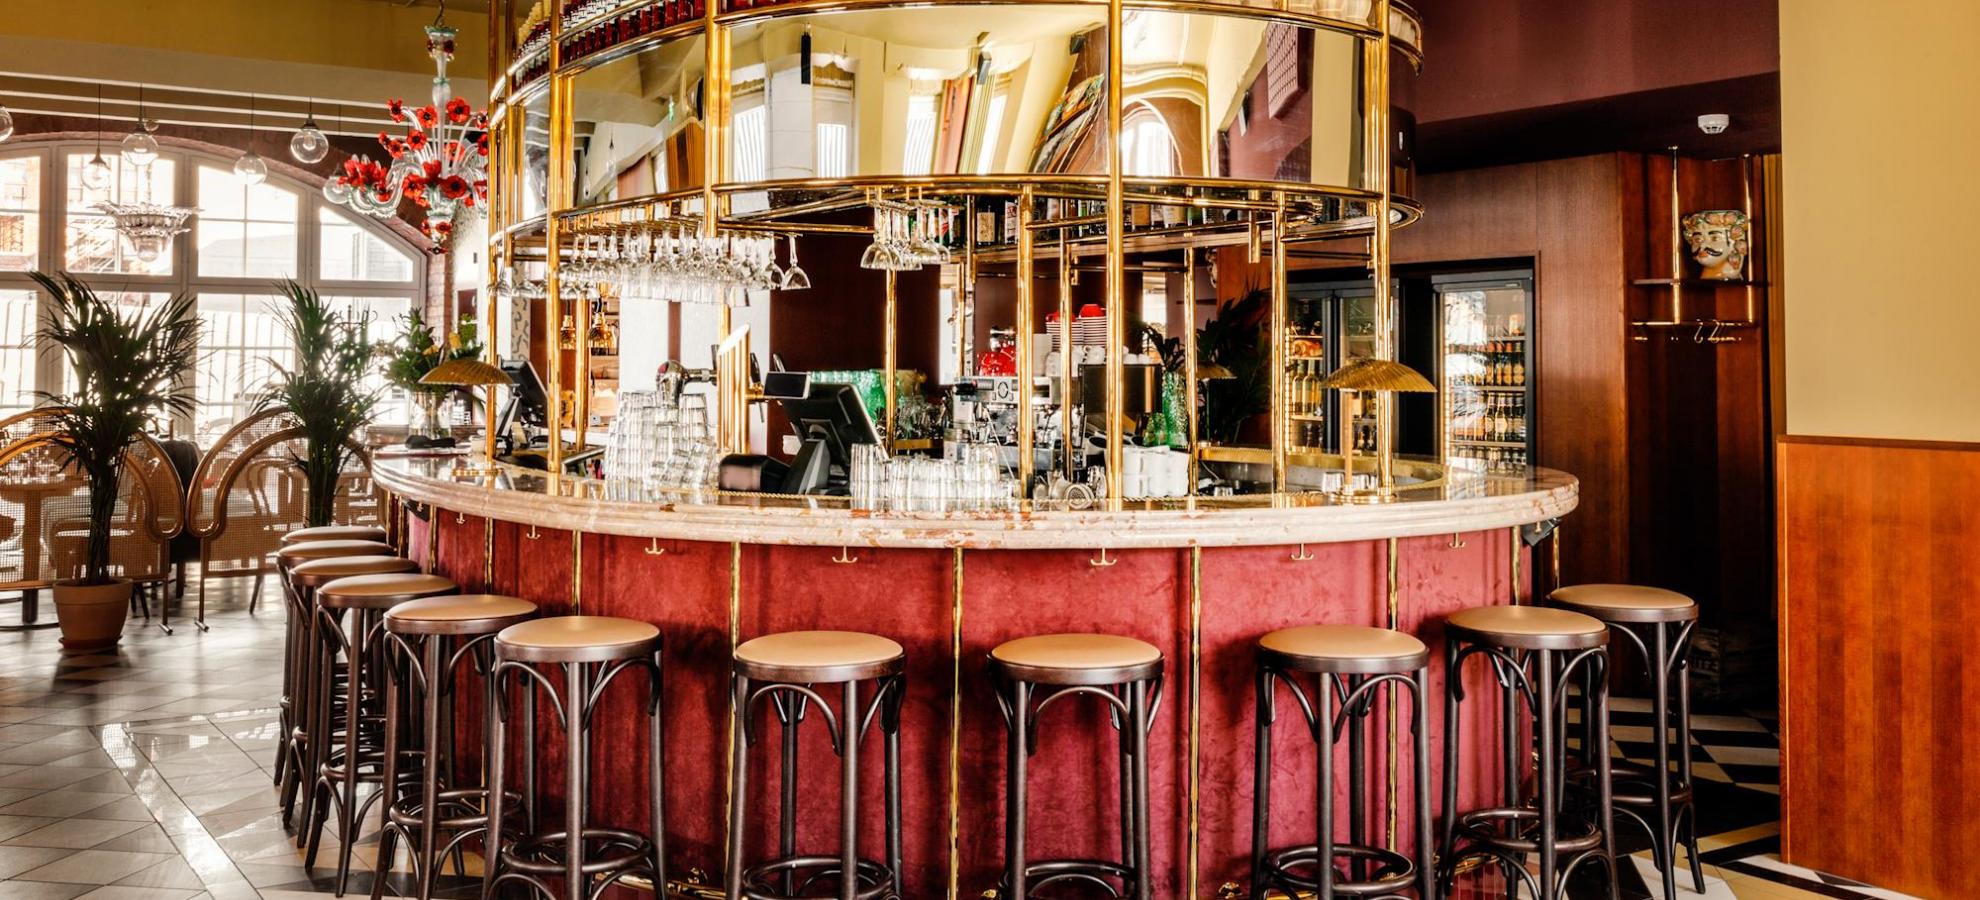 Ravintola Madonna bar, a fancy red walled bar topped with marble, bar stools surrounding it, stands in the center of a large room with a tiled floor.